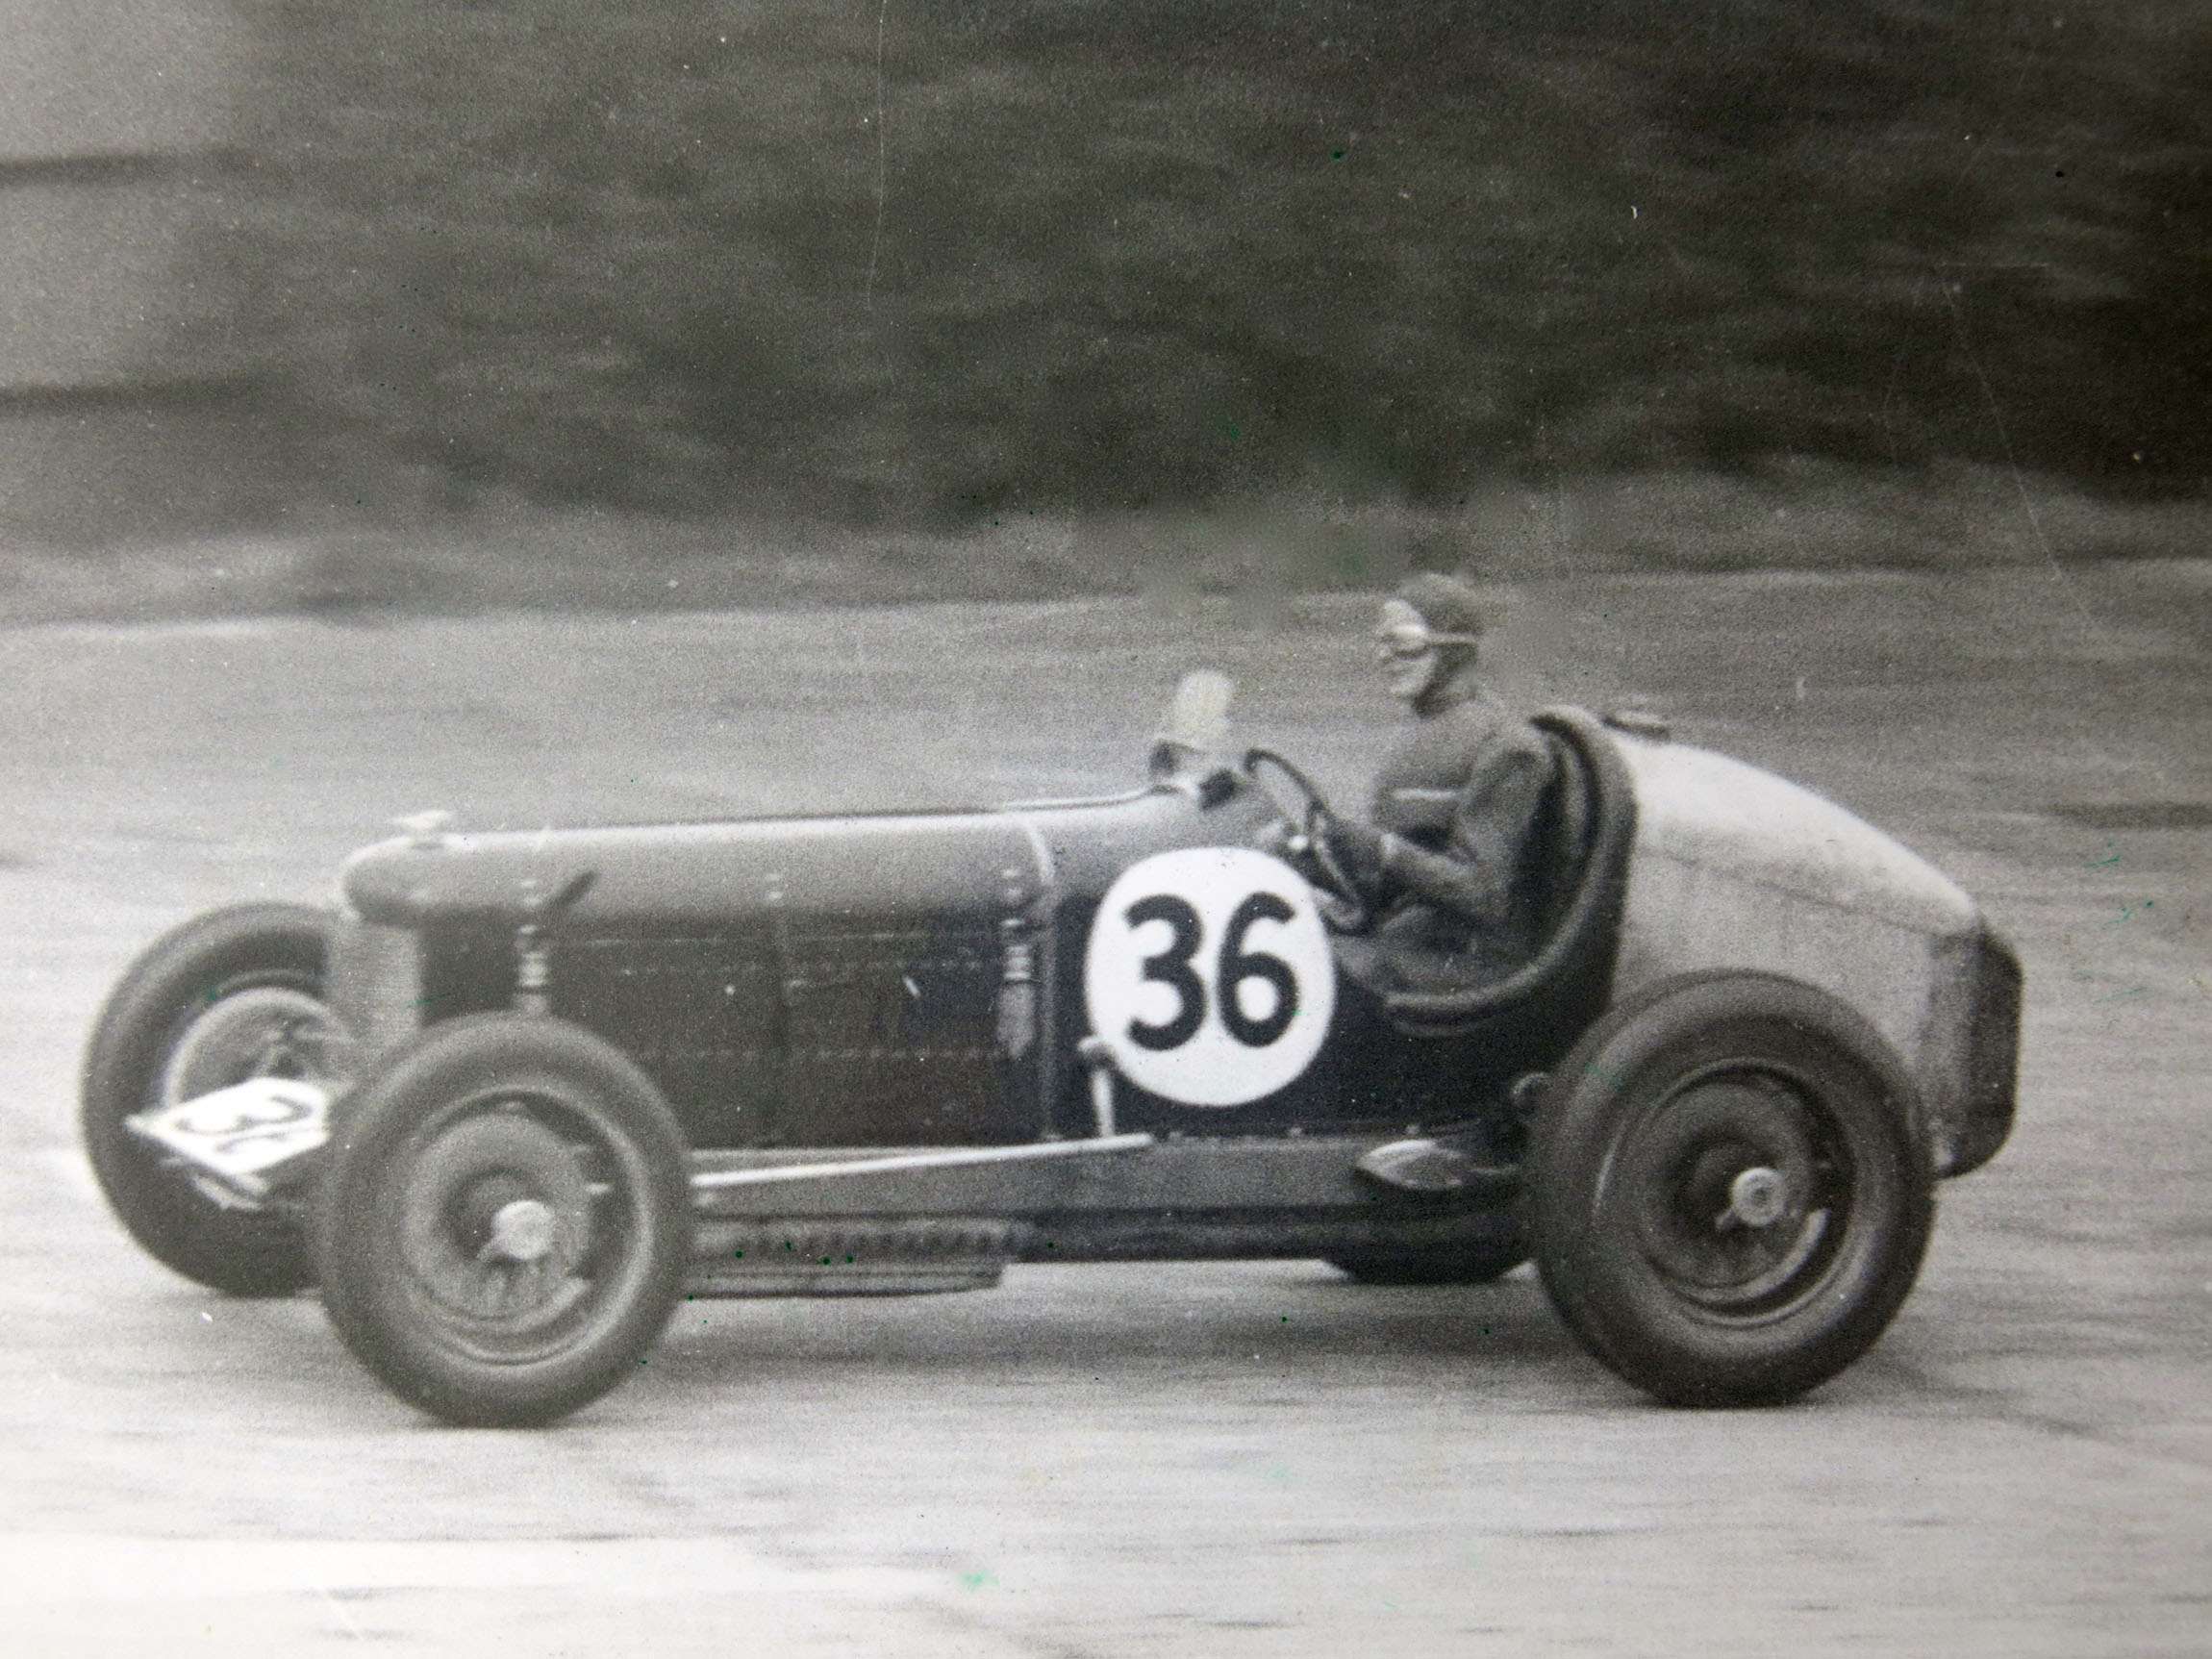 1935 BRDC 500 at Brooklands - ‘Buddy’ Featherstonhaugh co-drove Duesenberg with Dick Seaman but retired when tank split